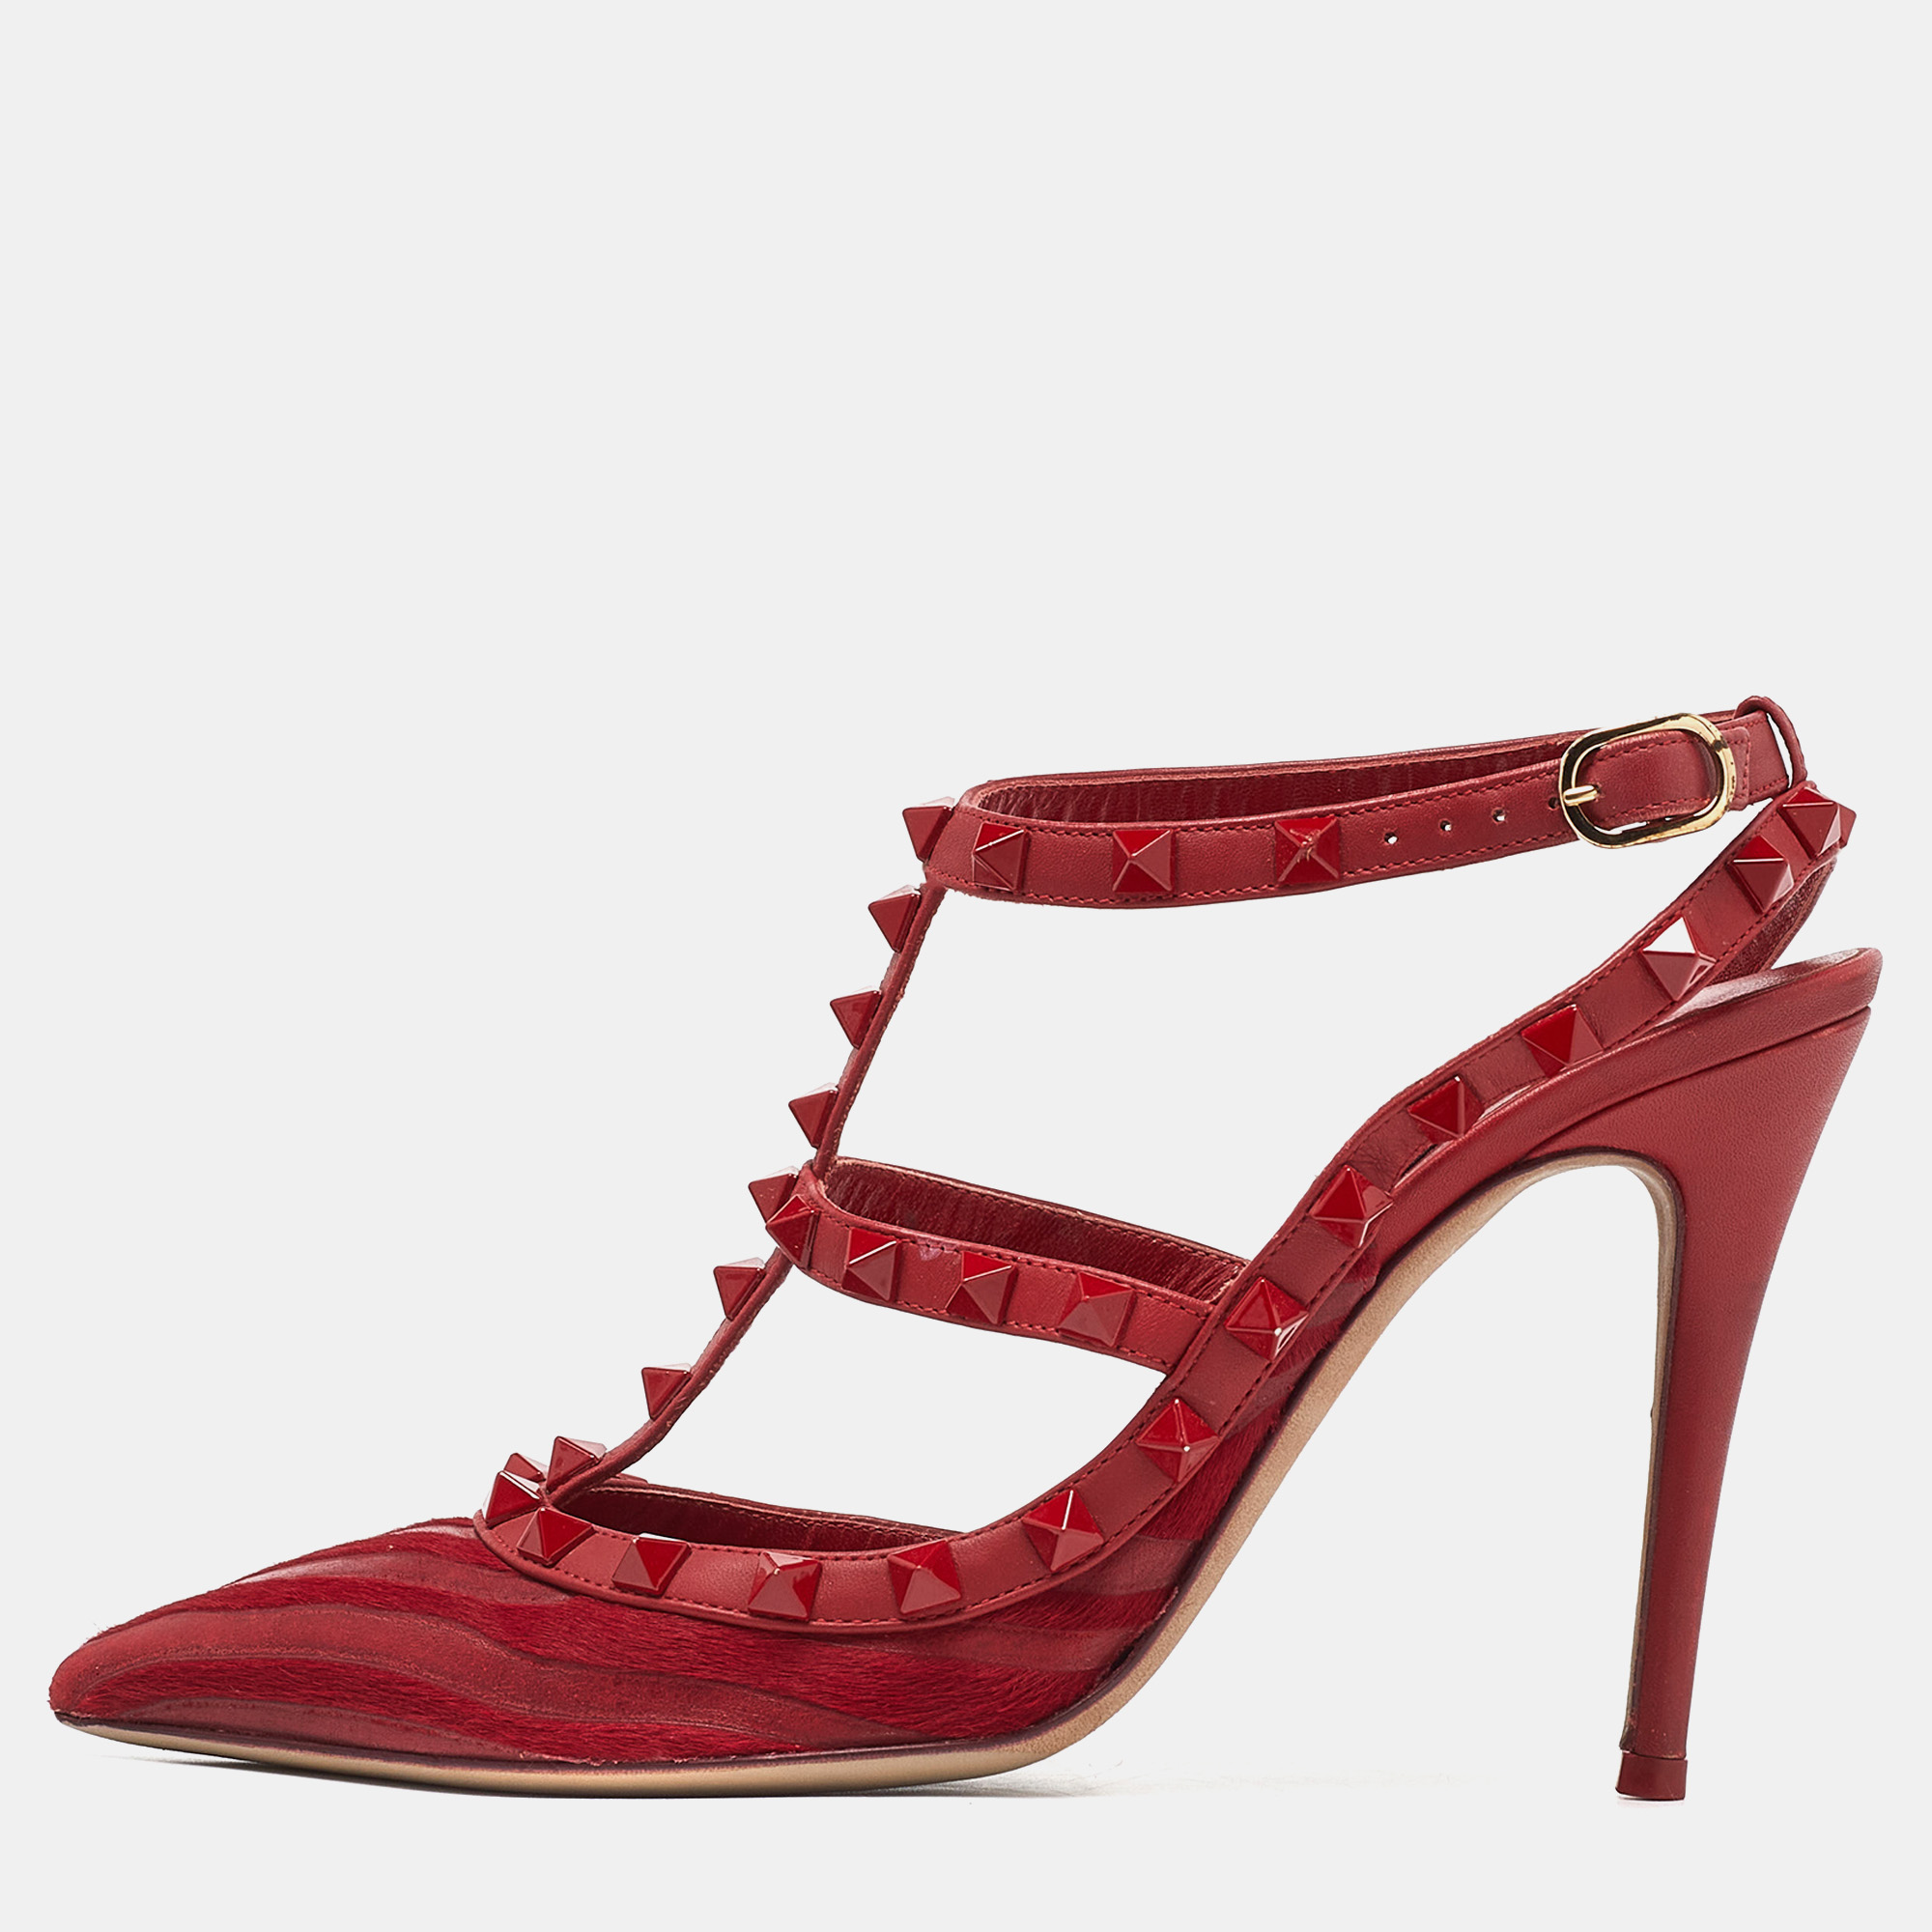 Valentino red leather and pony hair rockstud strappy pumps size 38.5